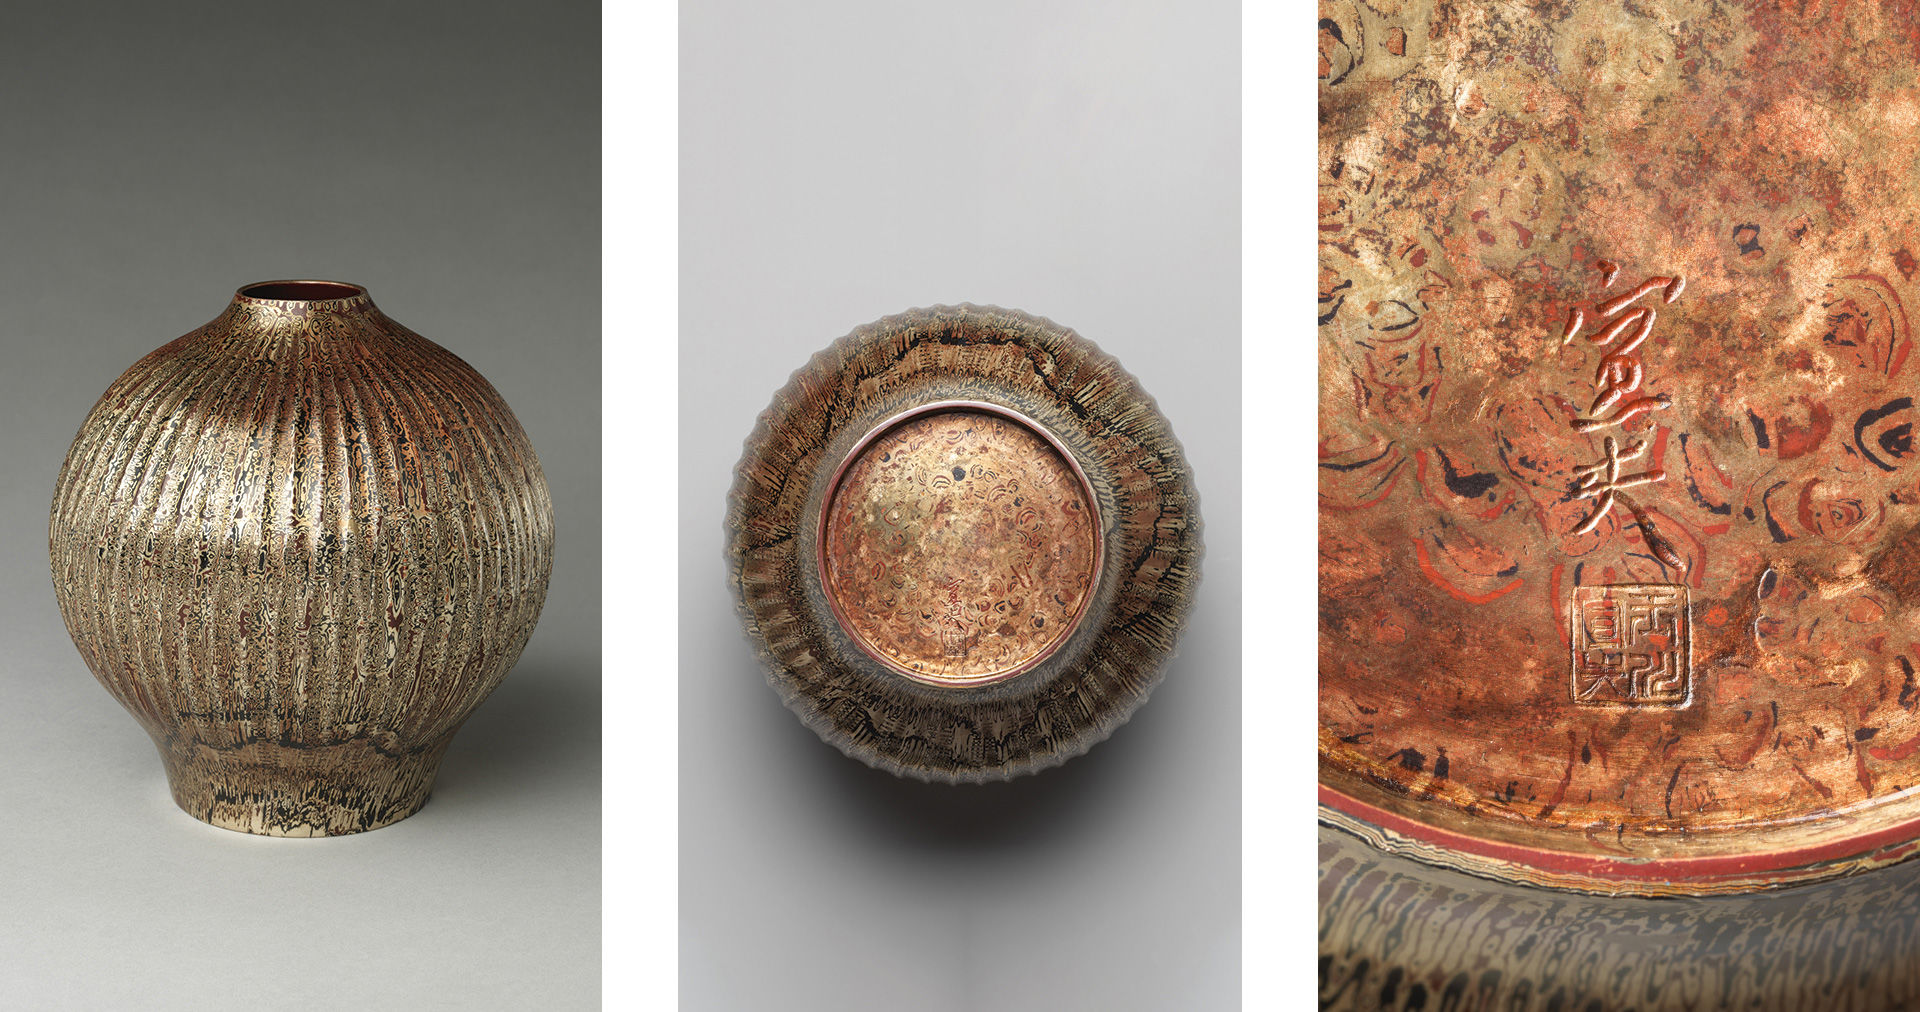 A composite image of the same onion-shaped, and fluted vessel from different perspectives, showing a profile view, a view of the base and a close-up of the base featuring the maker’s mark and the distinctive and impressionistic wood grain knot pattern. The vessel is a detailed blend of copper, red, silver, and dark brown colors.